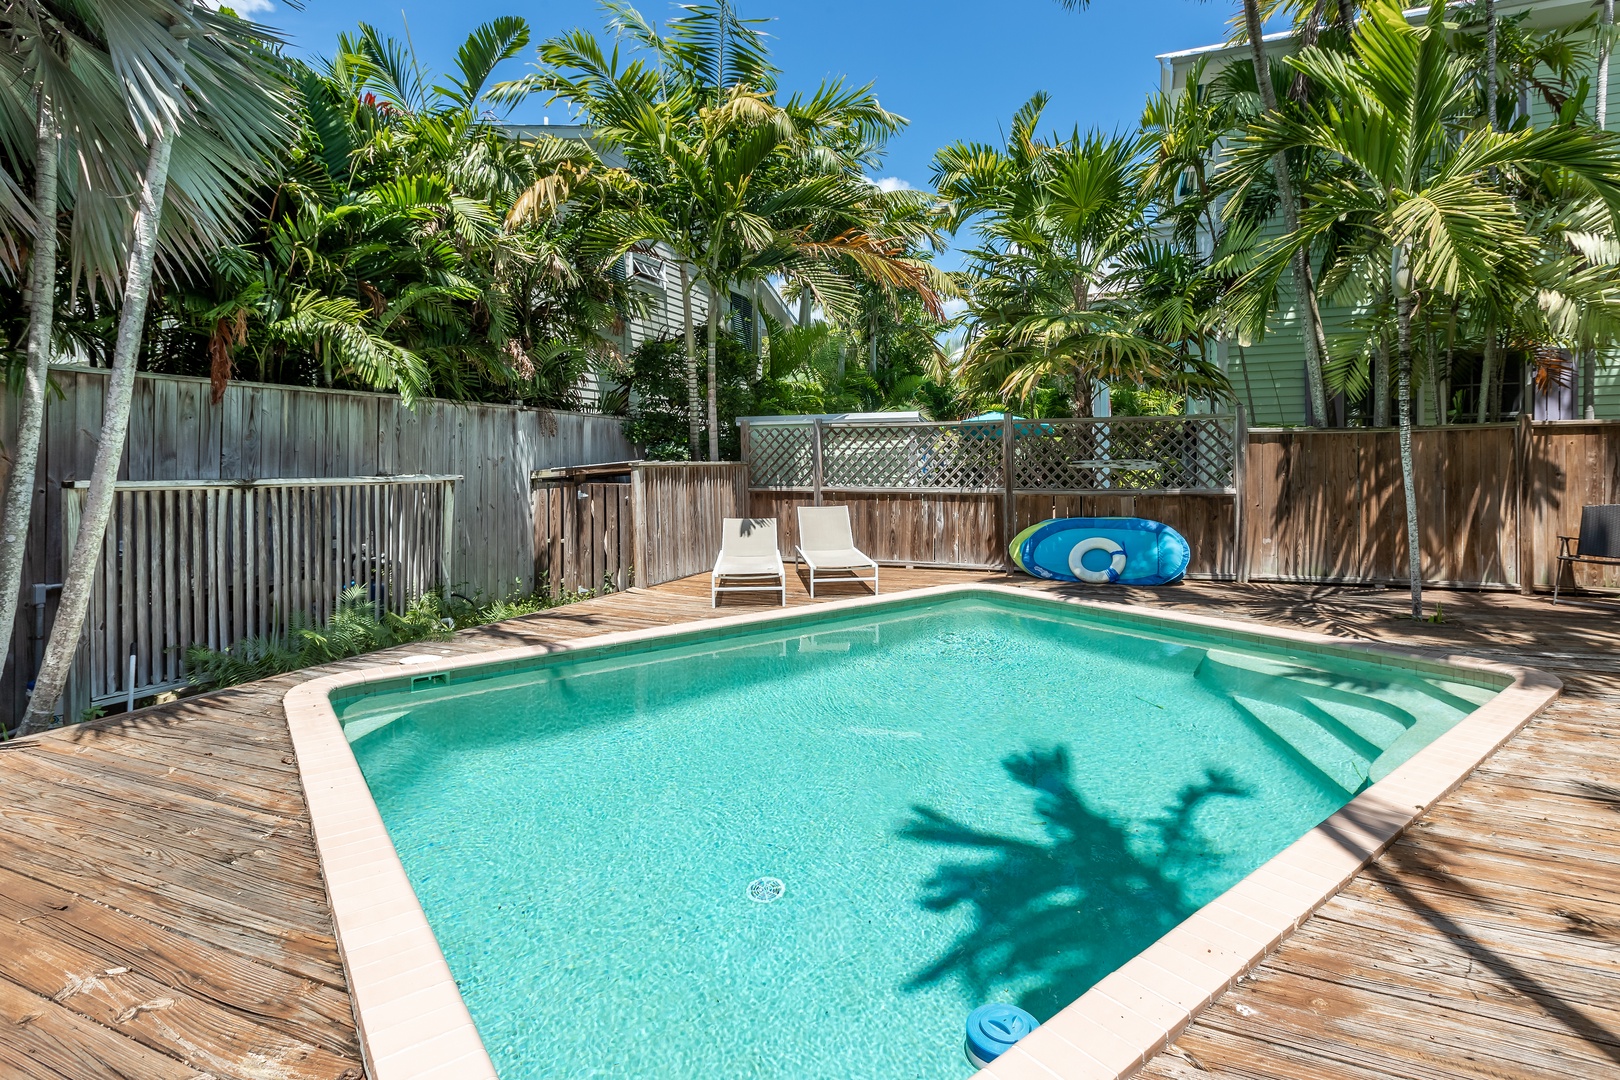 Seabreeze Delight shared pool